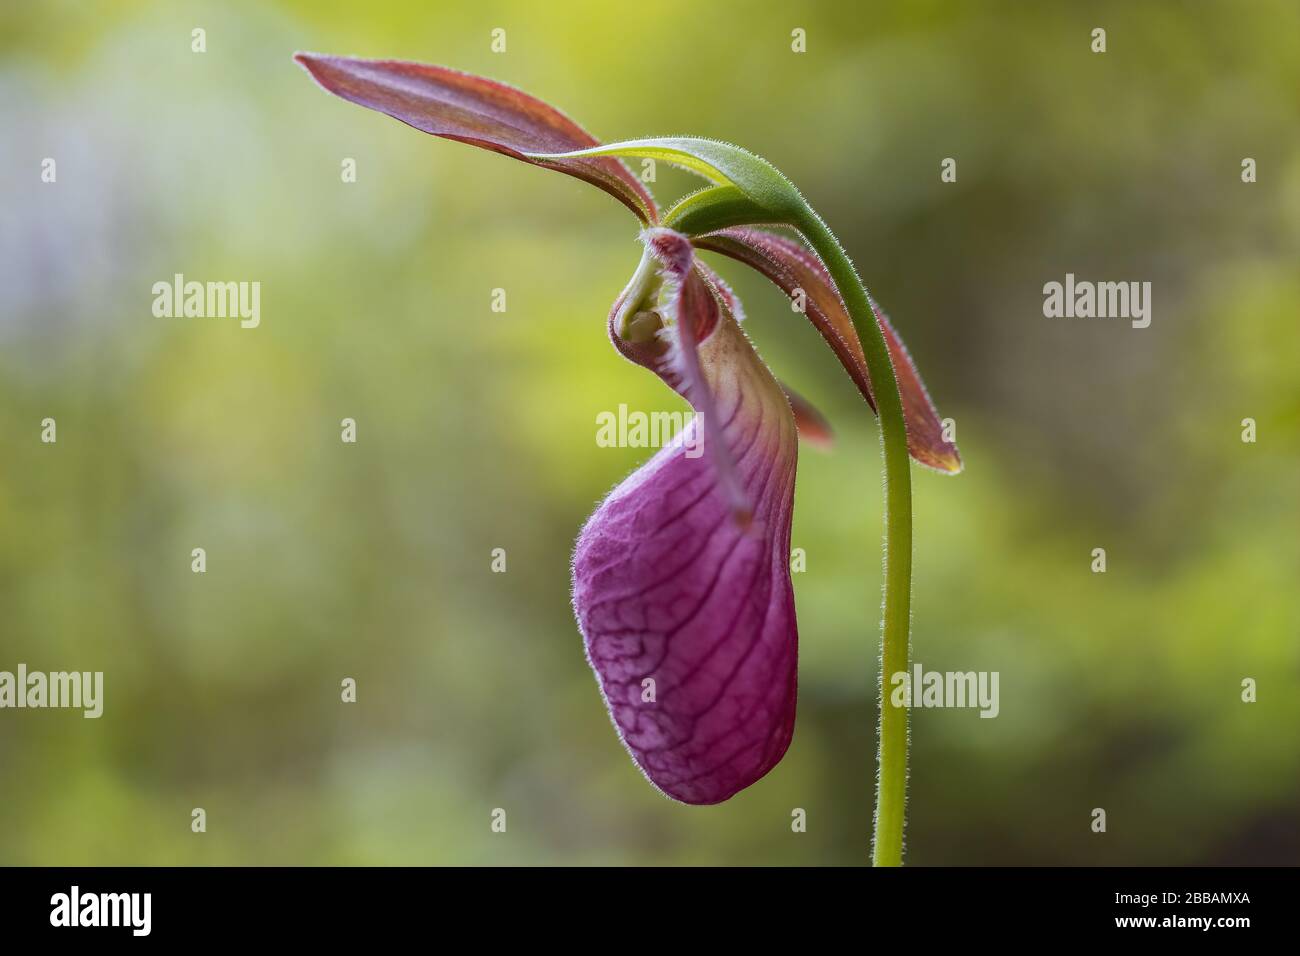 Close-up image of a Lady's Slipper flower in a woodland near Halifax, Nova Scotia, Canada. Stock Photo